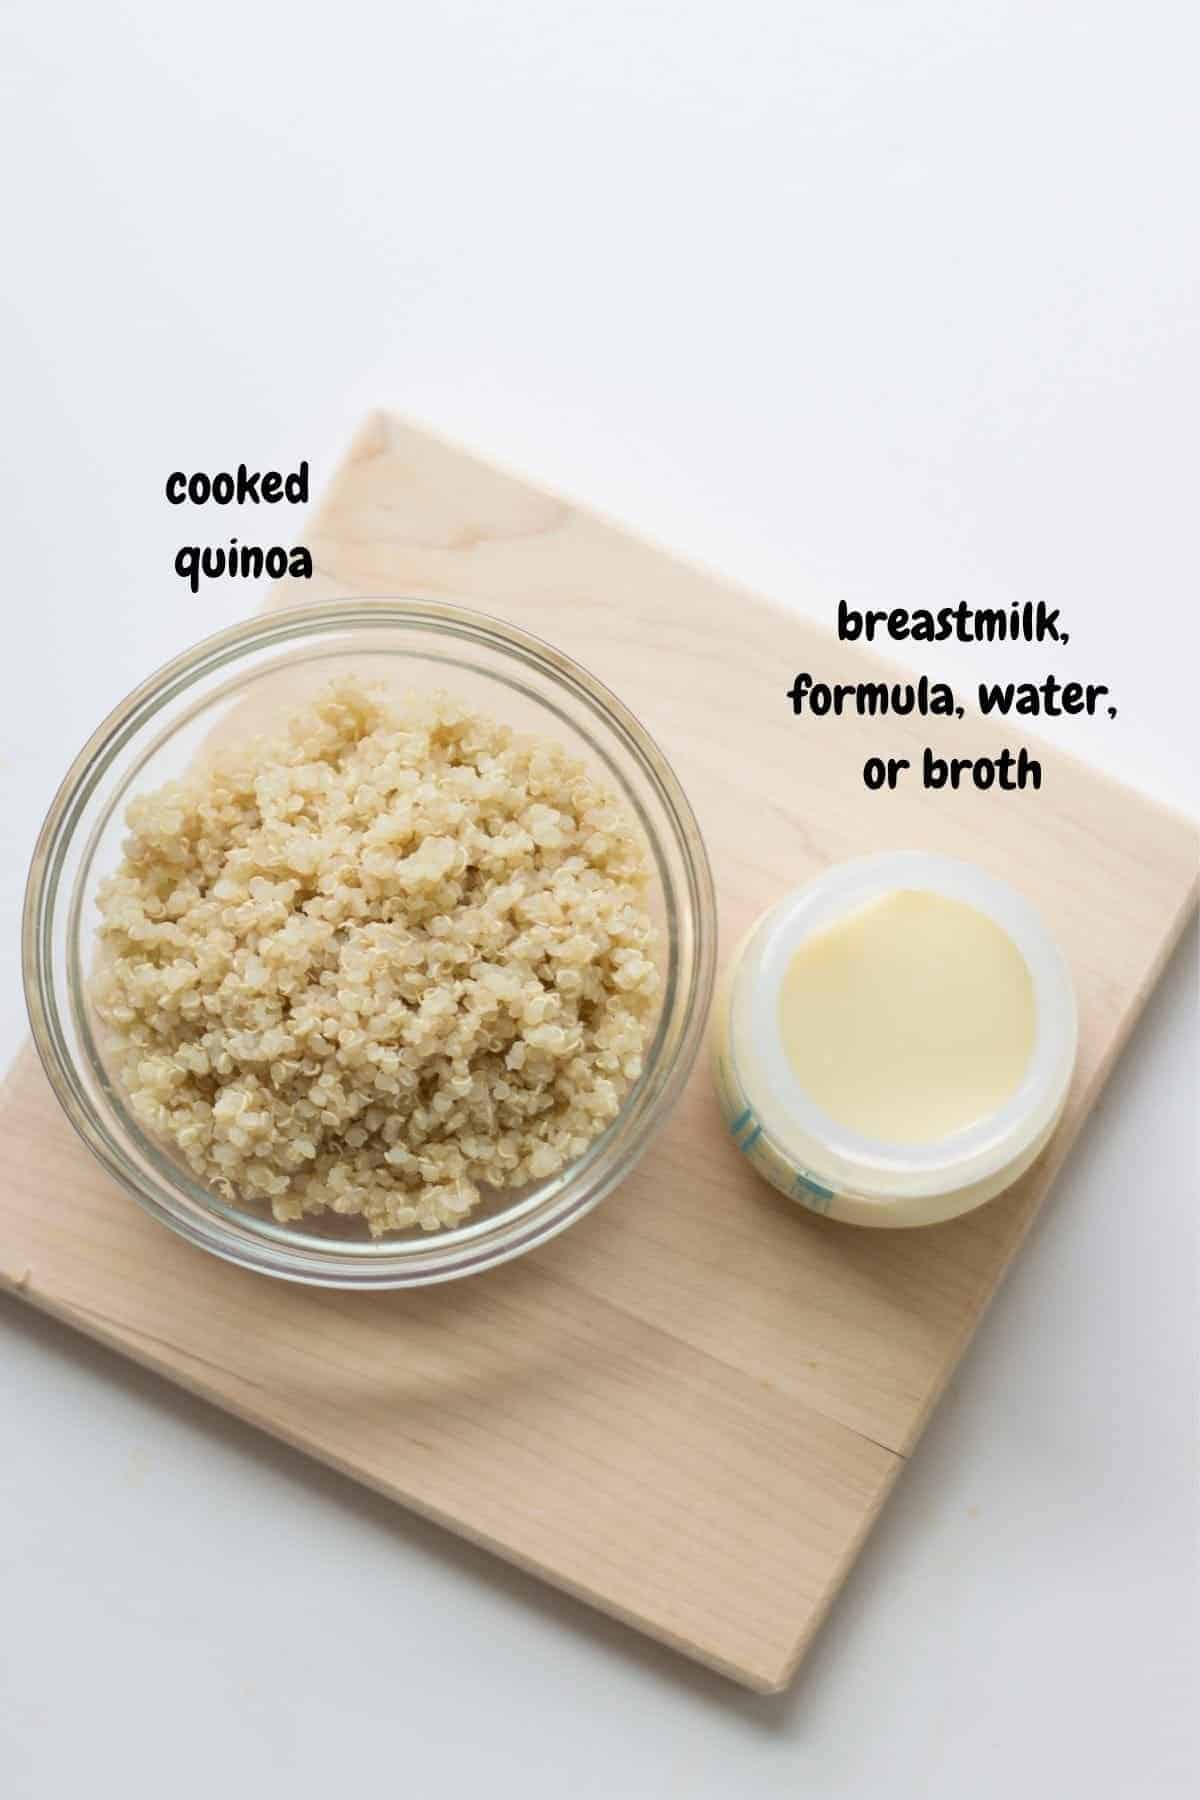 cooked quinoa and breastmilk placed on a wooden board.